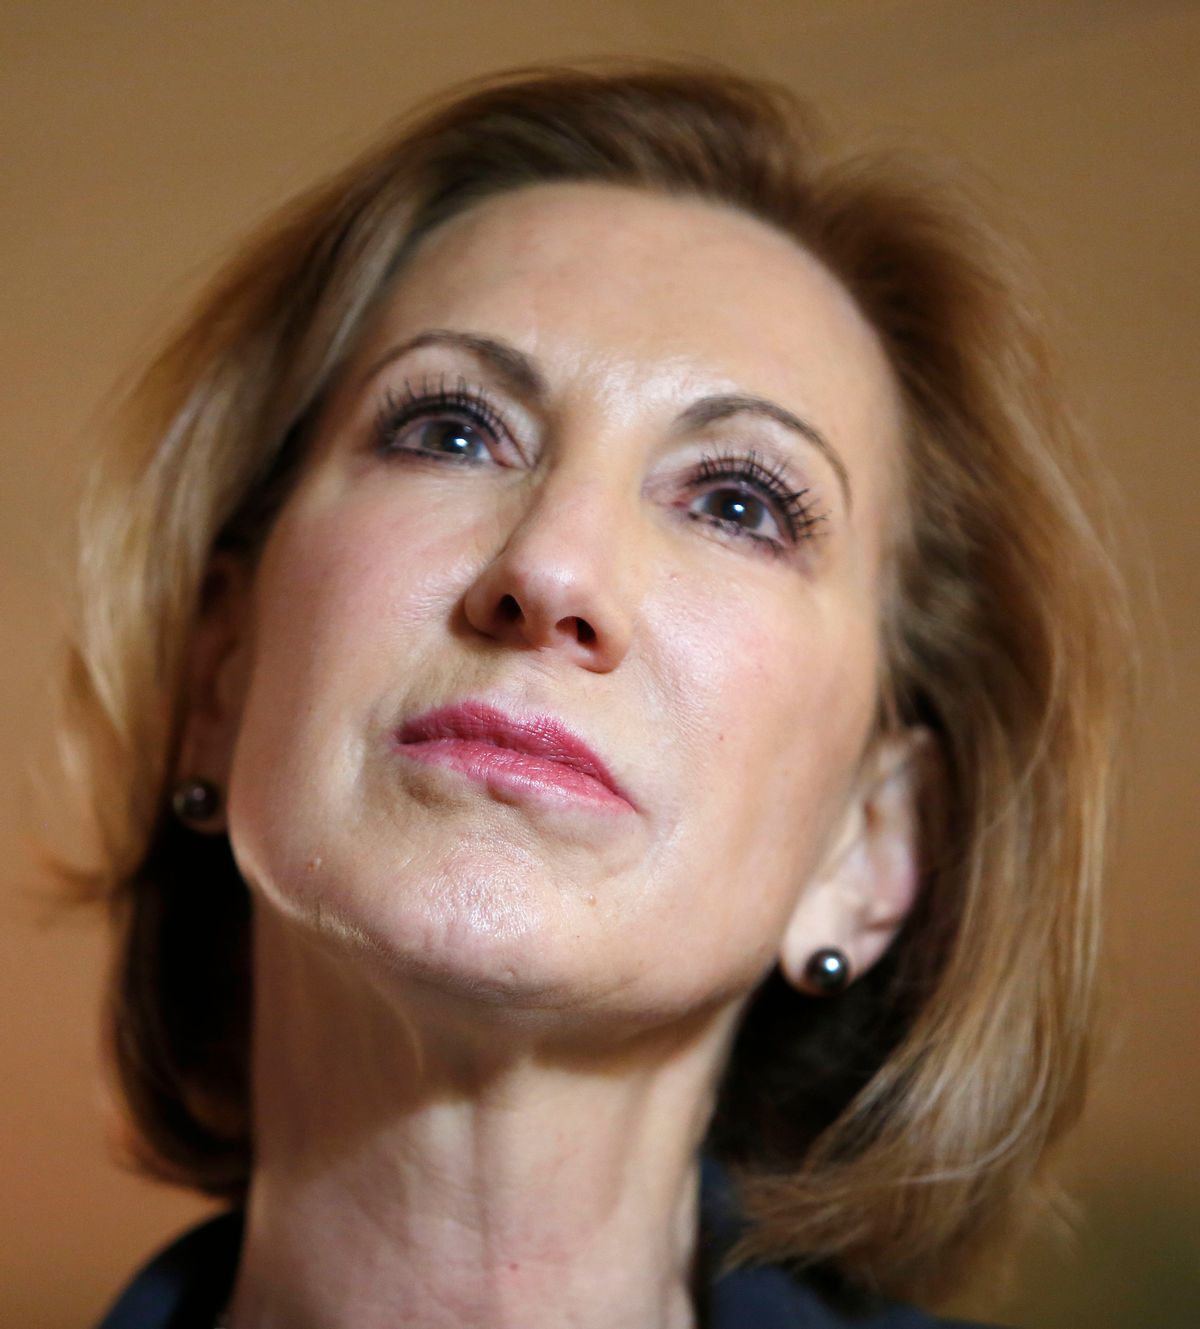 Former Hewlett-Packard CEO Carly Fiorina listens to questions during a business luncheon with New Hampshire Republican lawmakers, Tuesday, April 28, 2015, in Concord, N.H. (AP Photo/Jim Cole)  (AP)